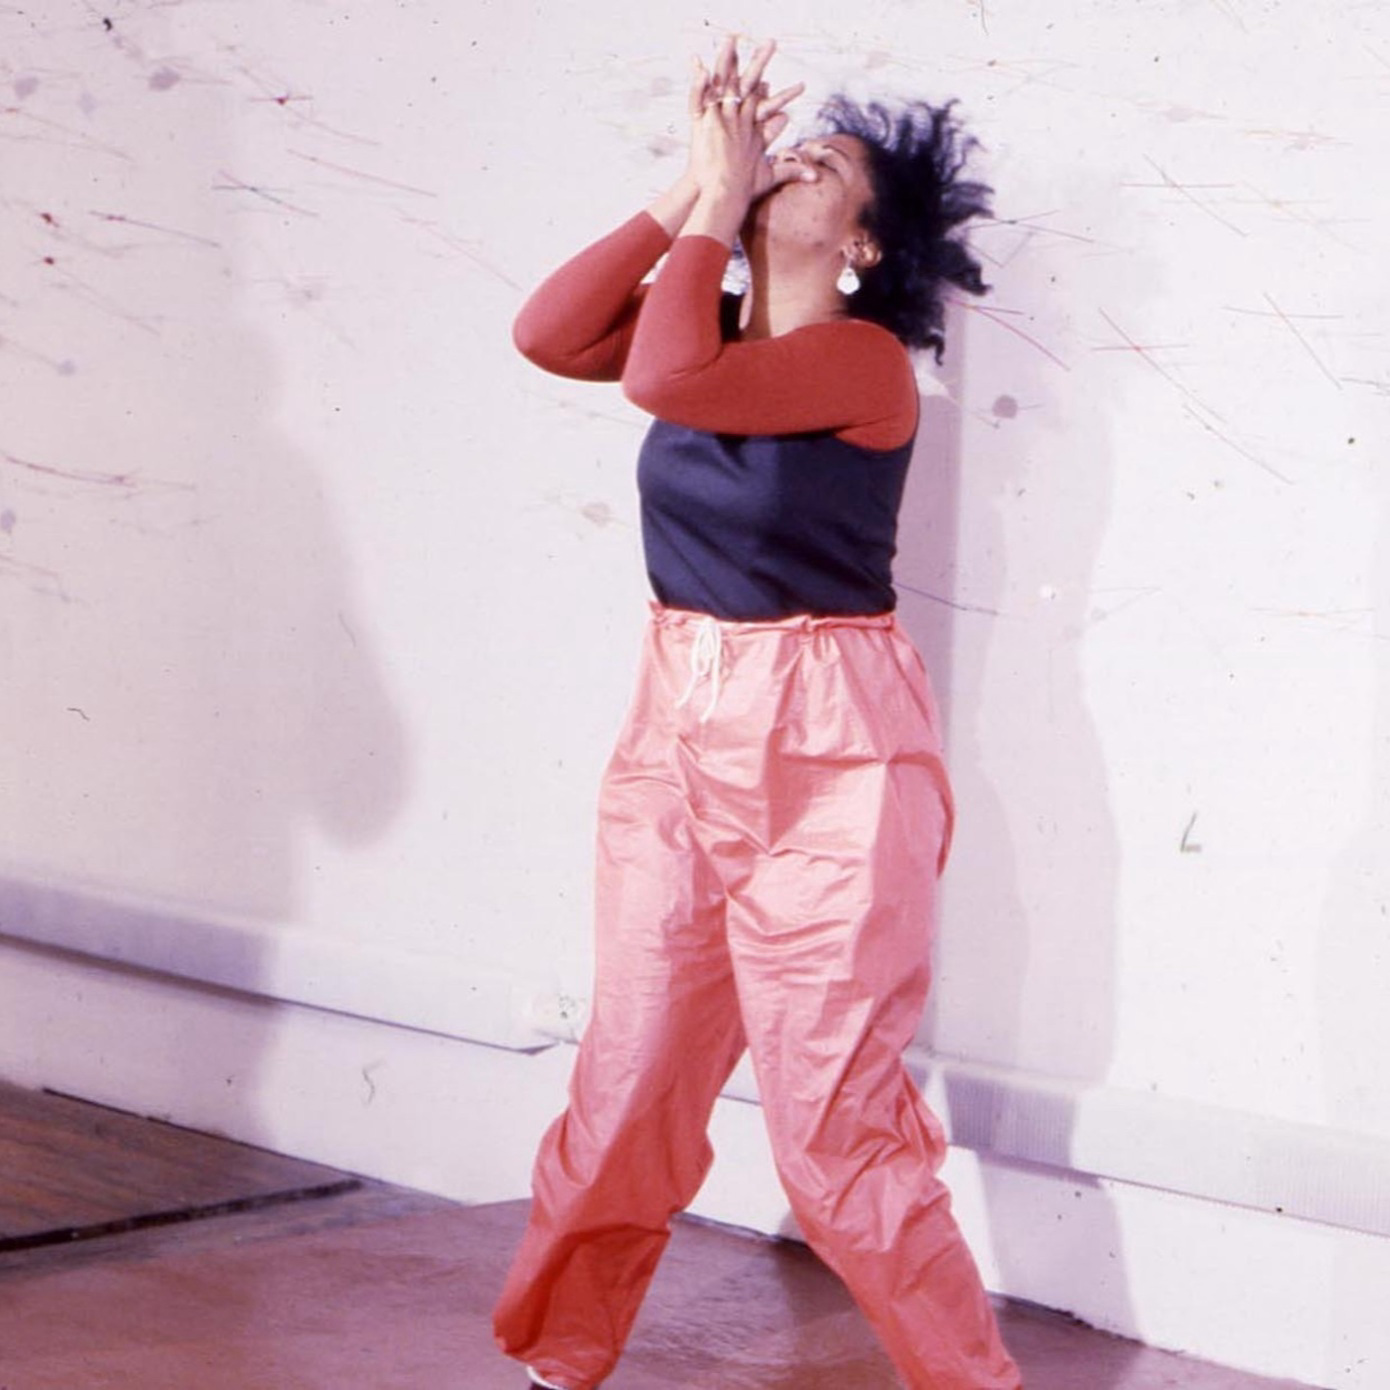 Senga Nengudi performing Air Propo at Just Above Midtown, 1981. Courtesy Senga Nengudi and Lévy Gorvy Skip to main content Use high-contrast text Plan your visit What’s on Art and artists Store Become a member Reserve timed tickets Just Above Midtown Changing Spaces Member Previews, Oct 6–8 Oct 9, 2022–Feb 18, 2023 MoMA Become a member Exhibition MoMA, Floor 3, 3 South The Edward Steichen Galleries Just Above Midtown—or JAM—was an art gallery and self-described laboratory led by Linda Goode Bryant that foregrounded African American artists and artists of color. Open from 1974 until 1986, it was a place where black art flourished and debate was cultivated. The gallery offered early opportunities for artists now recognized as pivotal figures in late-20th-century art, including David Hammons, Butch